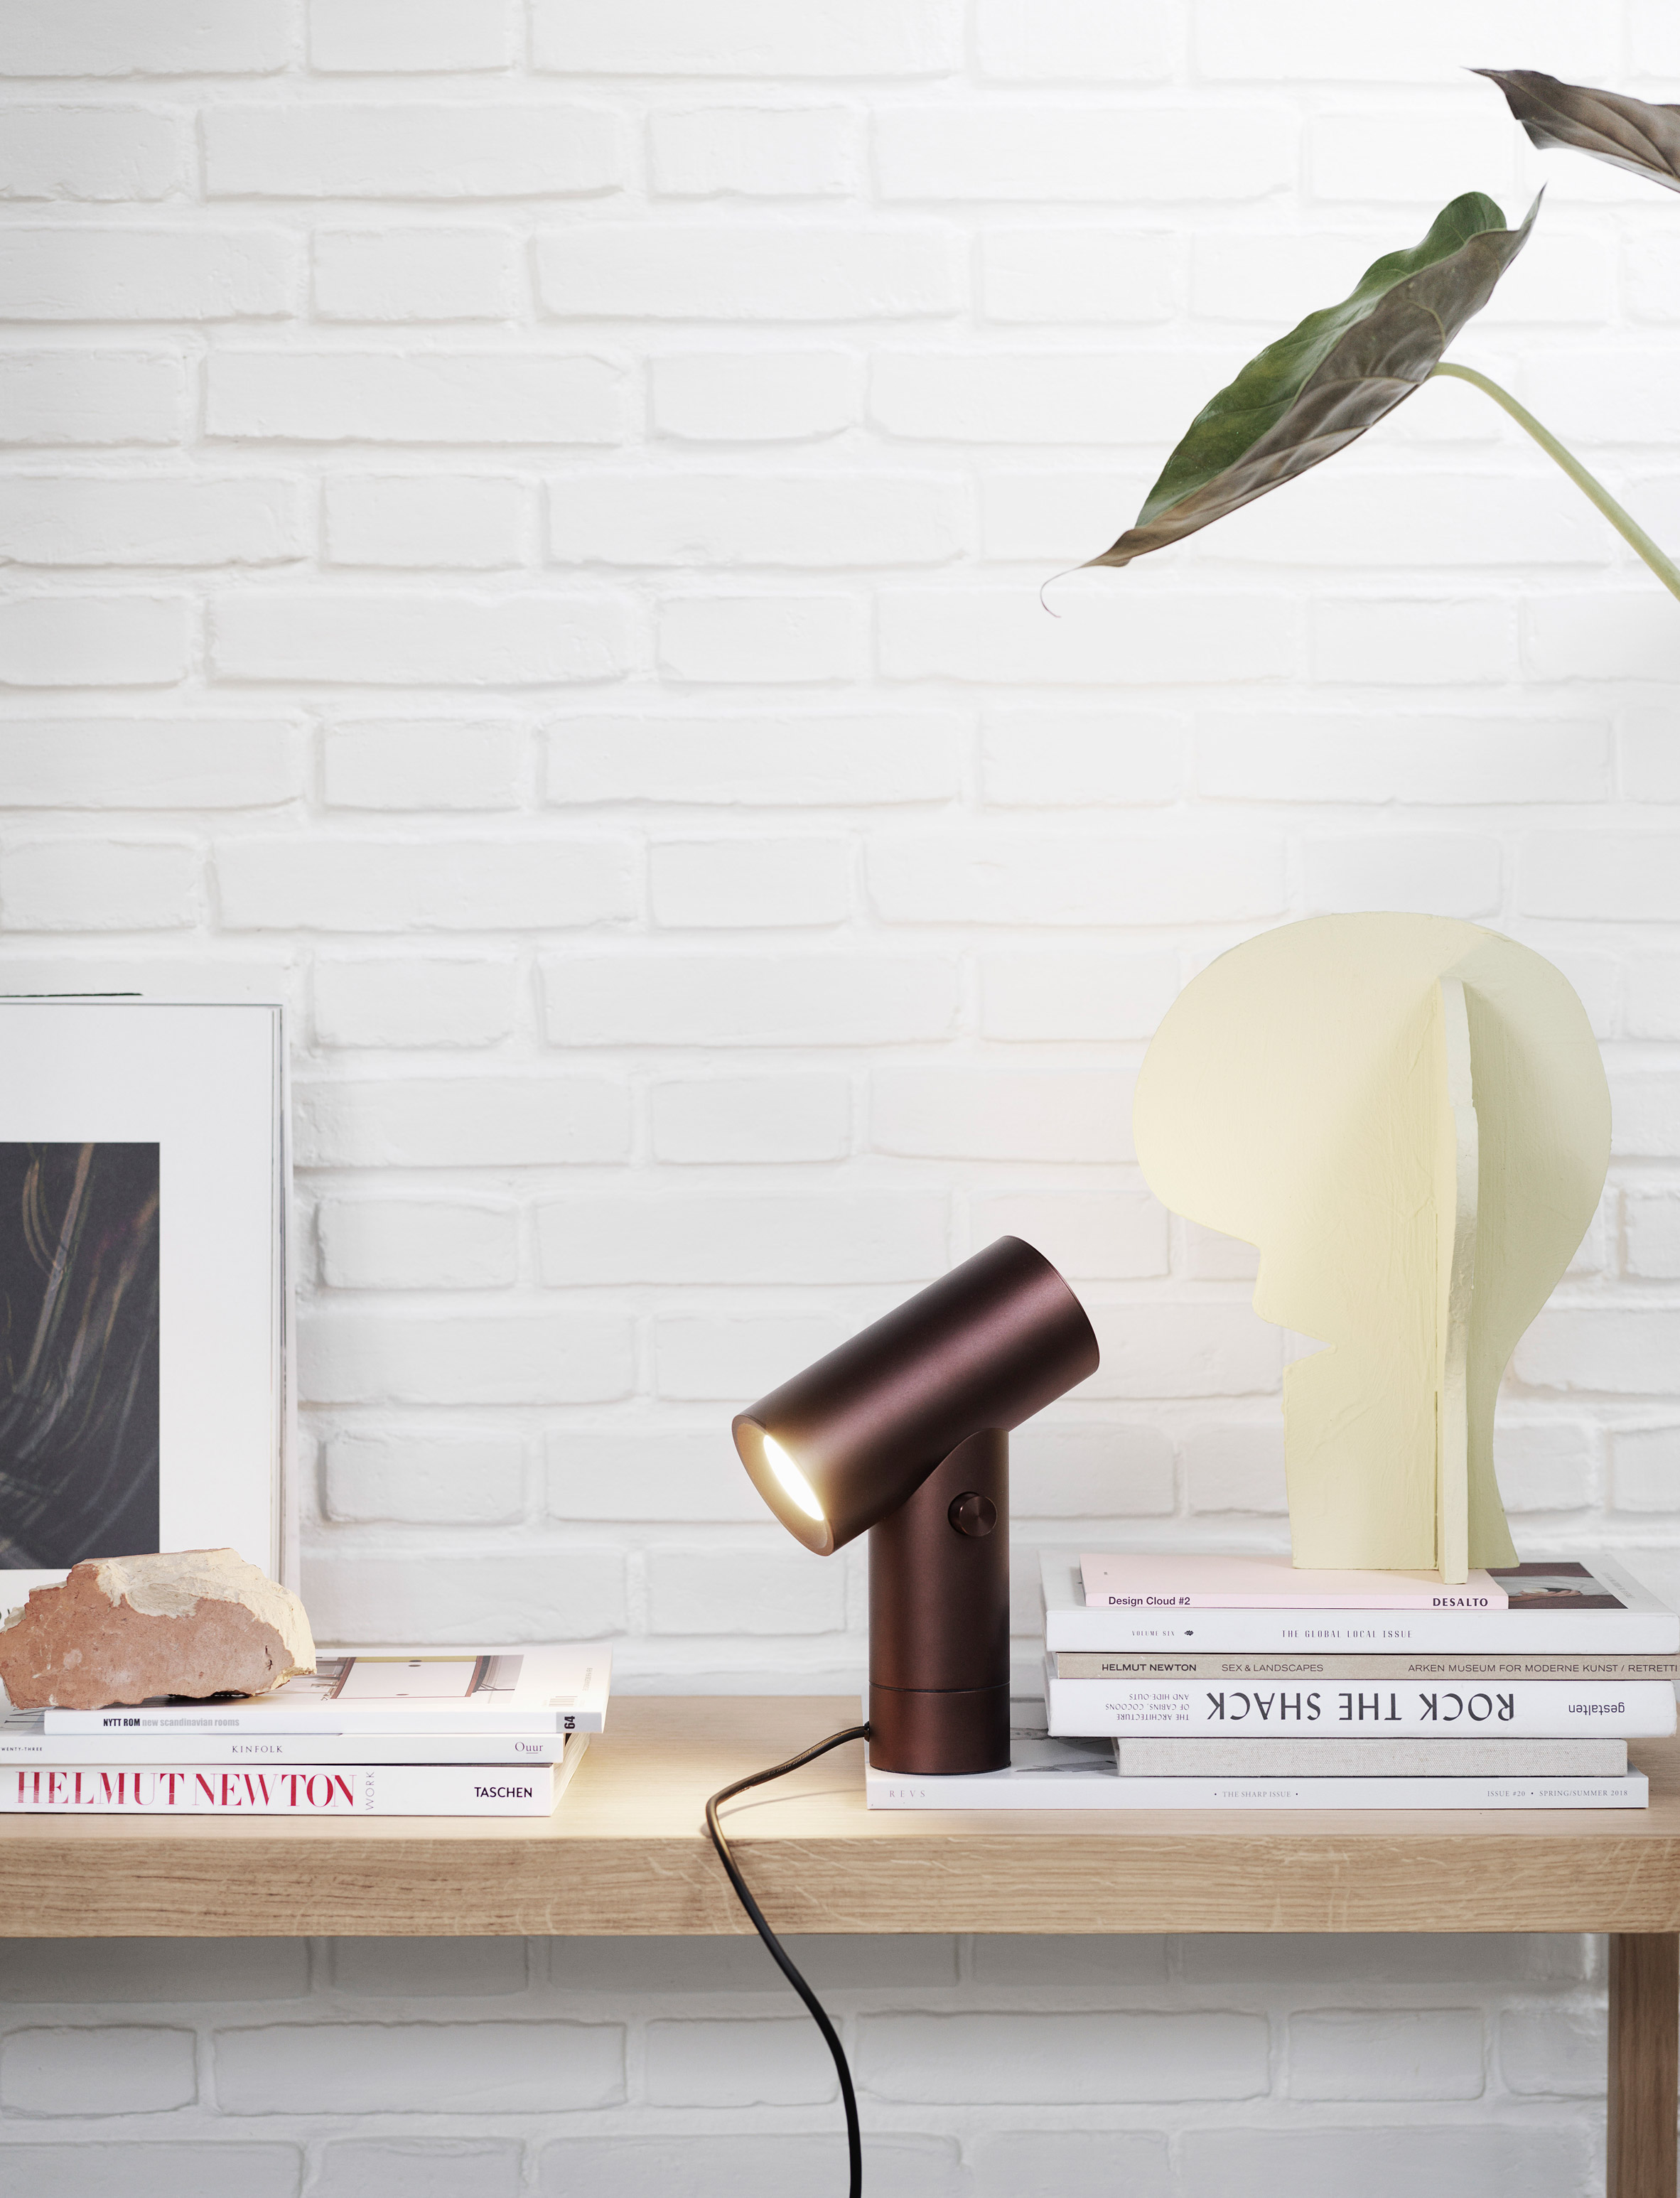 Tom Chung's double-ended lamp for Muuto references car headlights